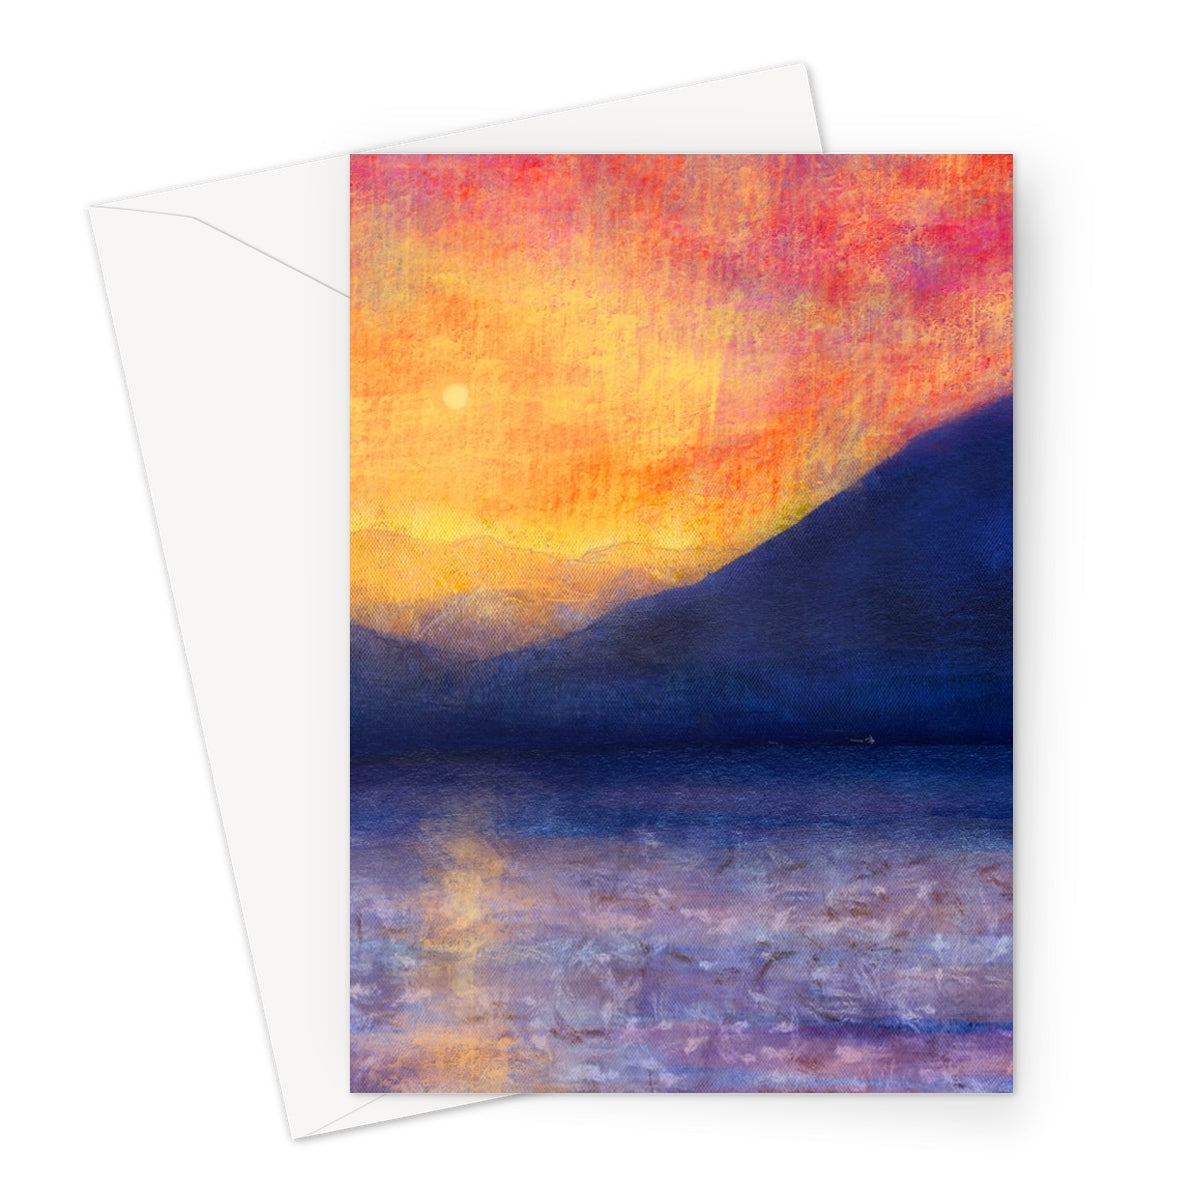 Sunset Approaching Mull Art Gifts Greeting Card-Greetings Cards-Hebridean Islands Art Gallery-A5 Portrait-1 Card-Paintings, Prints, Homeware, Art Gifts From Scotland By Scottish Artist Kevin Hunter